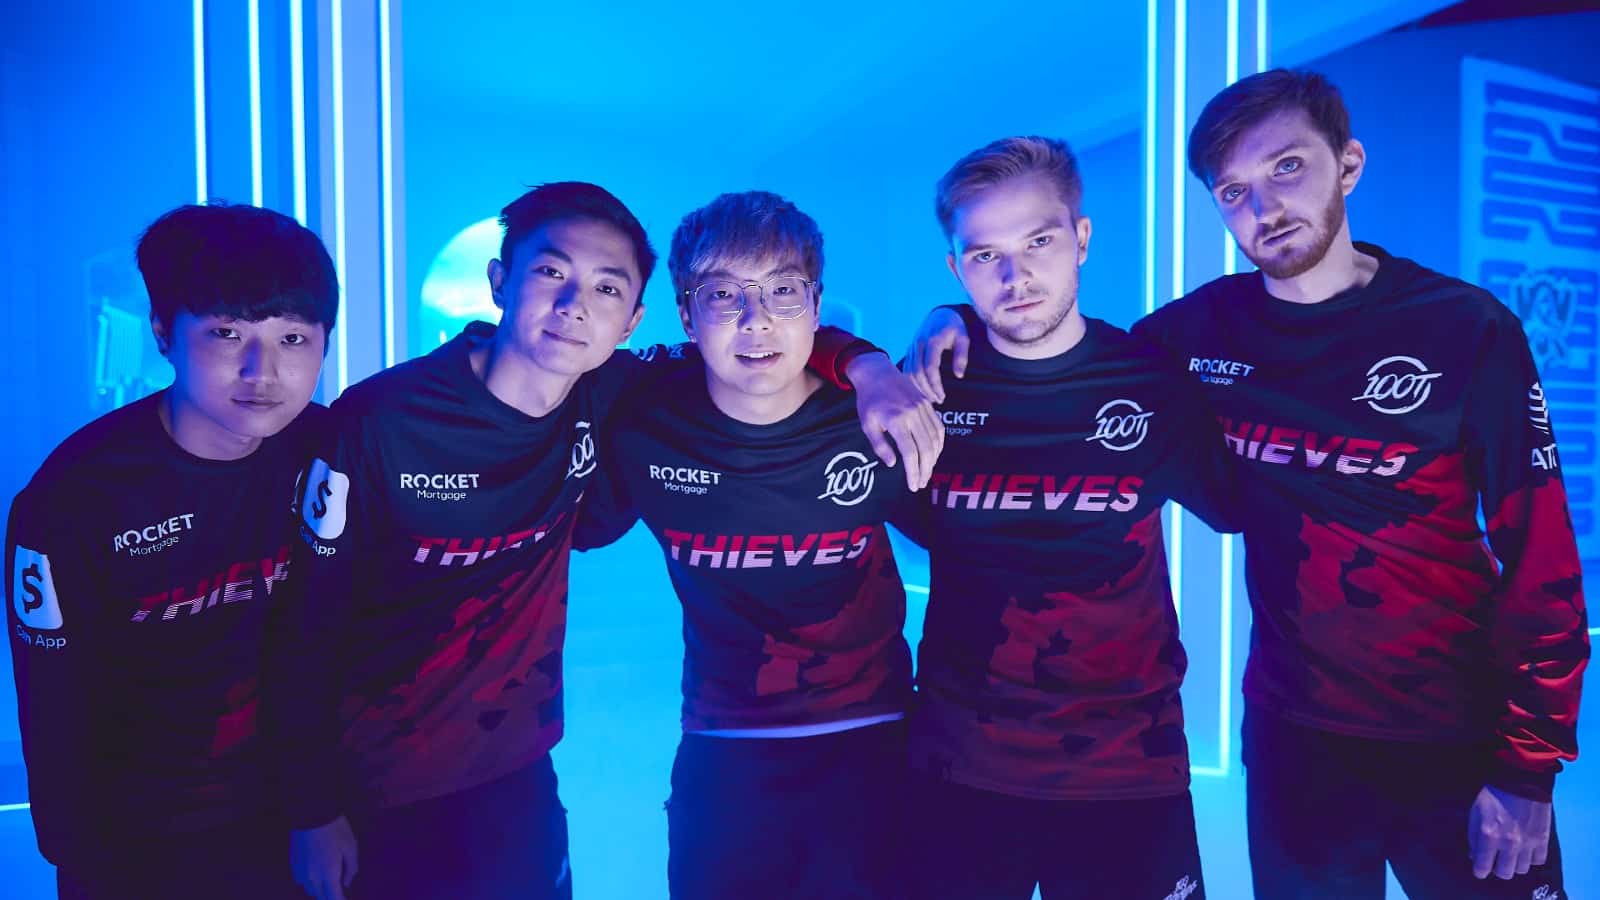 Group shot of 100 Thieves at Worlds 2021